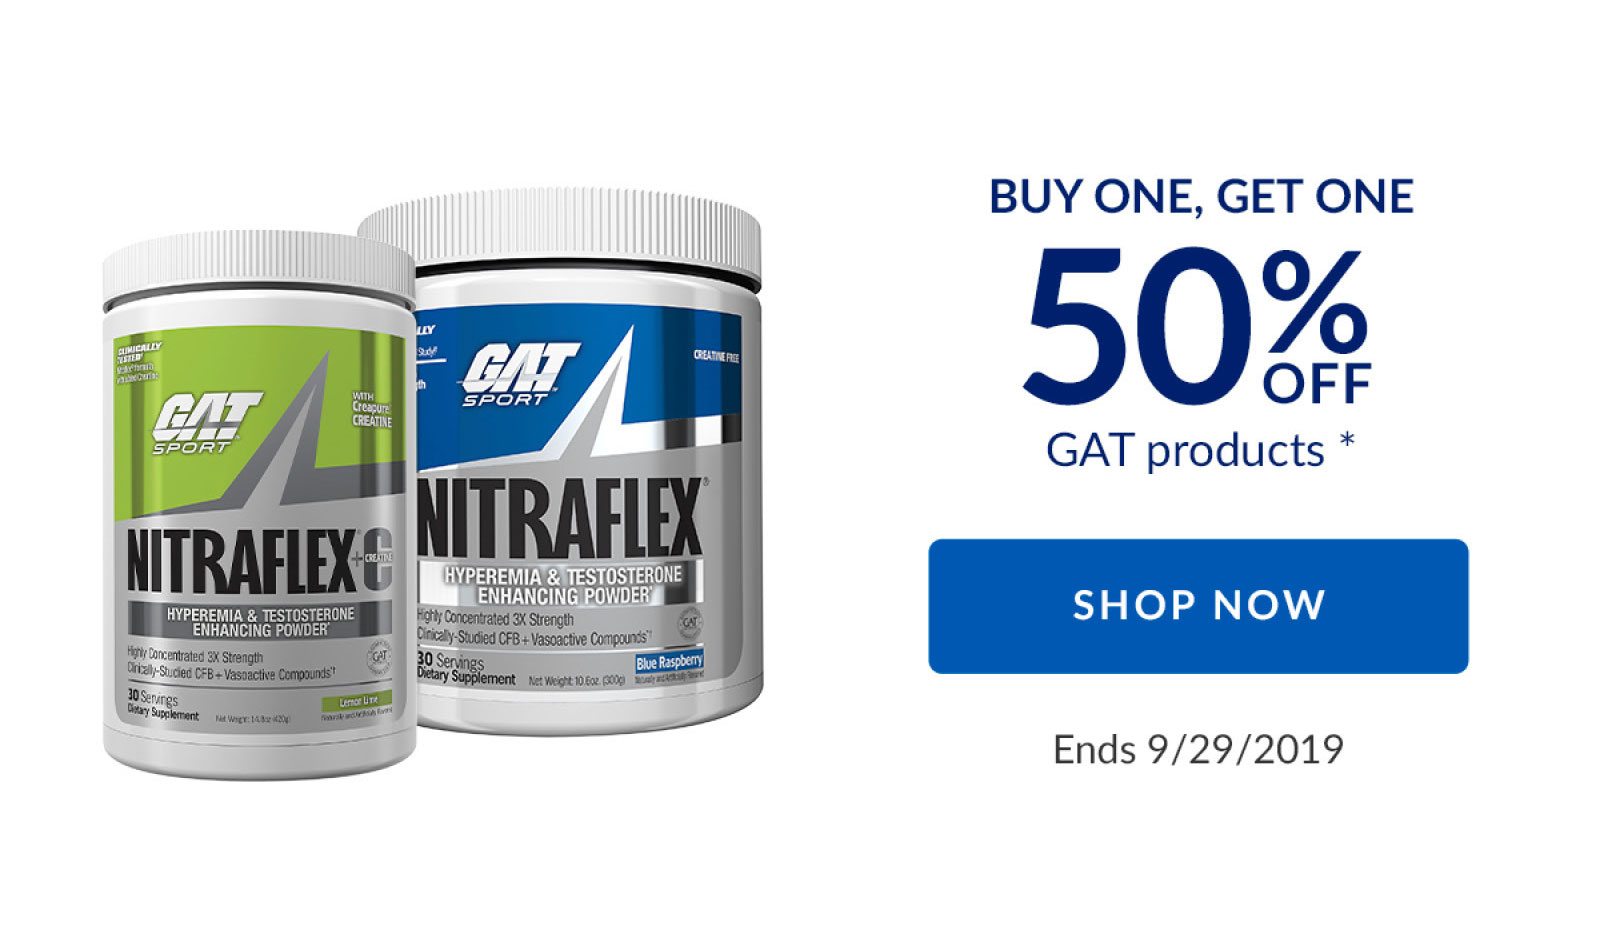 BUY ONE, GET ONE 50% OFF GAT products * | SHOP NOW | Ends 9/29/2019